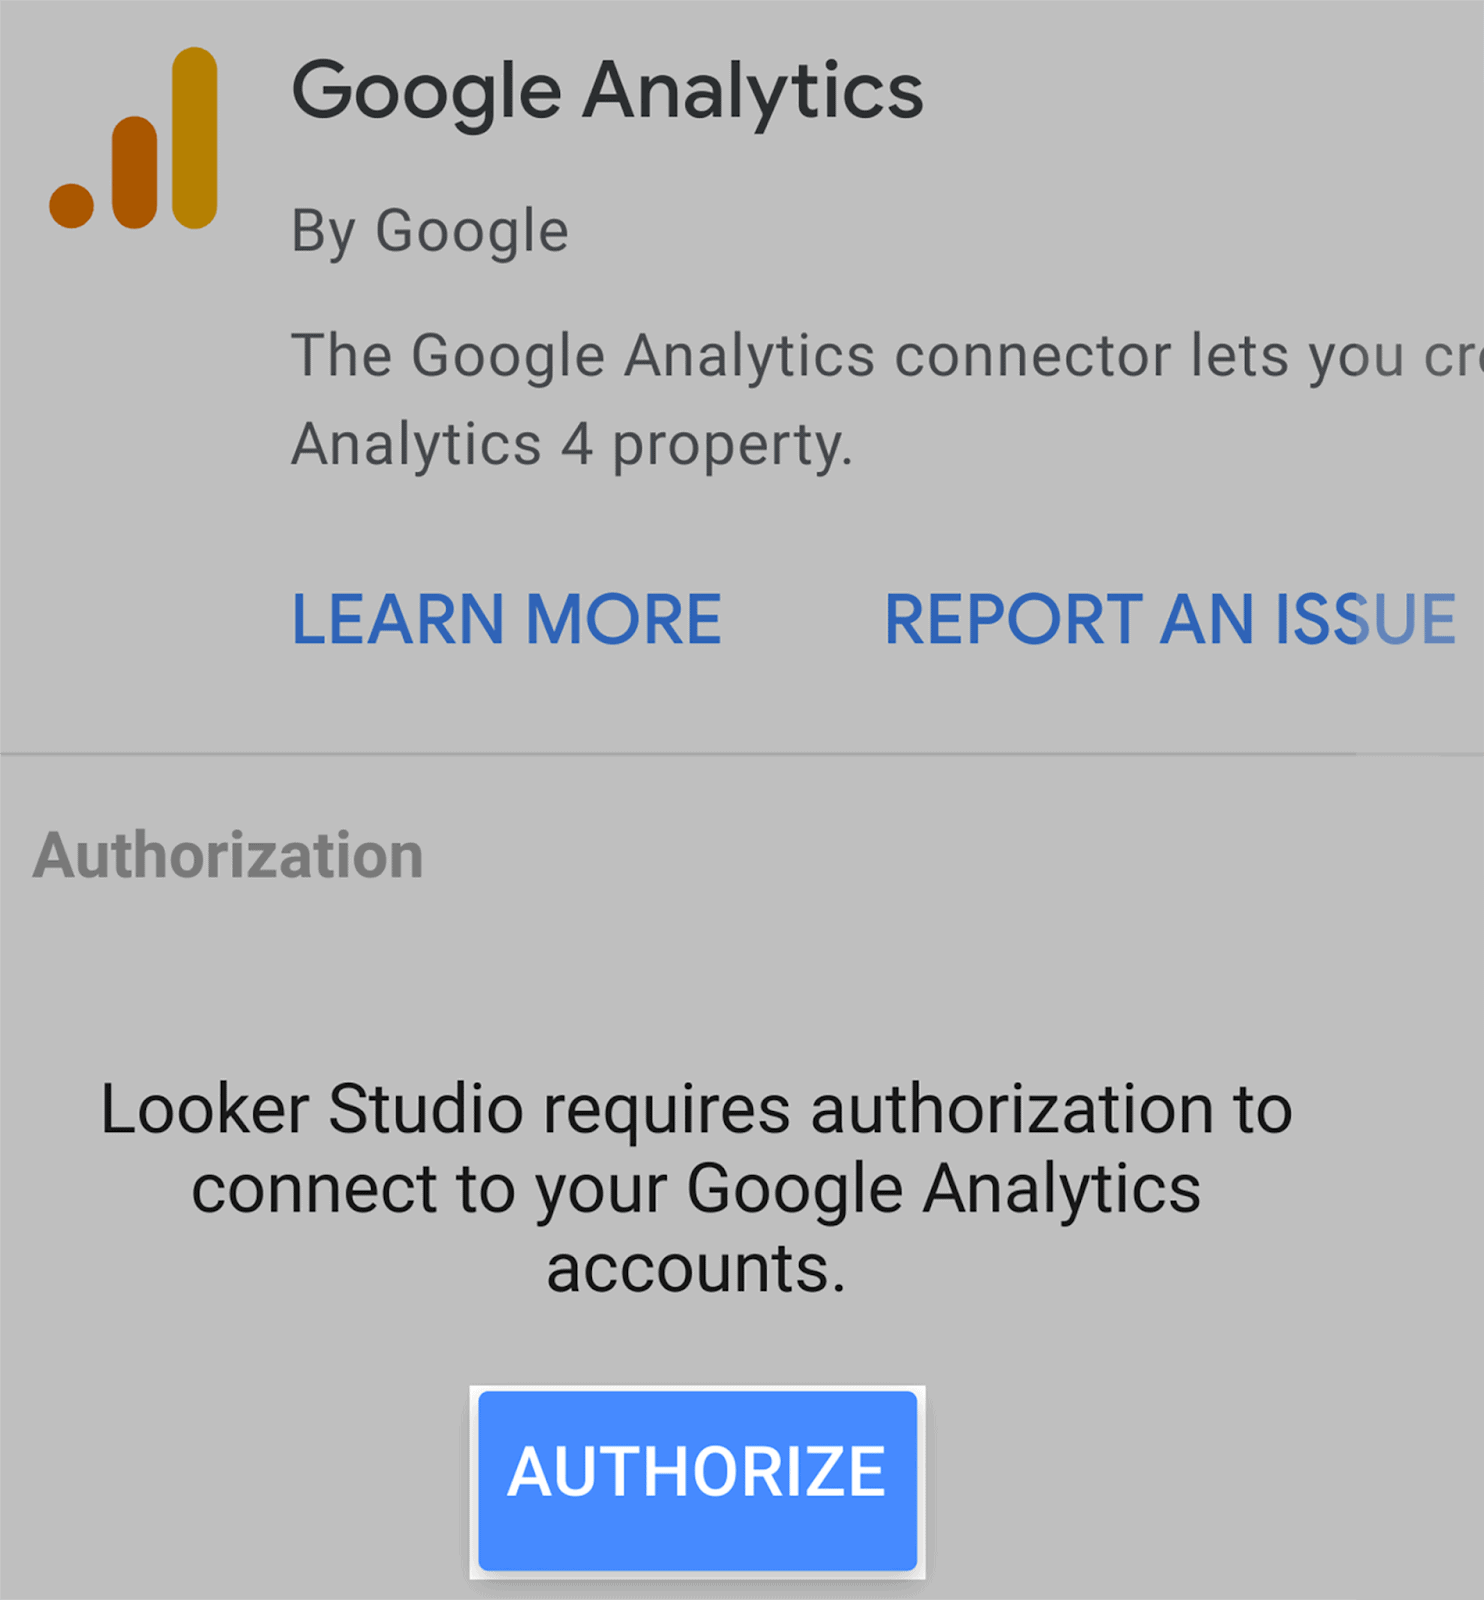 Authorize Google Analytics as a data source